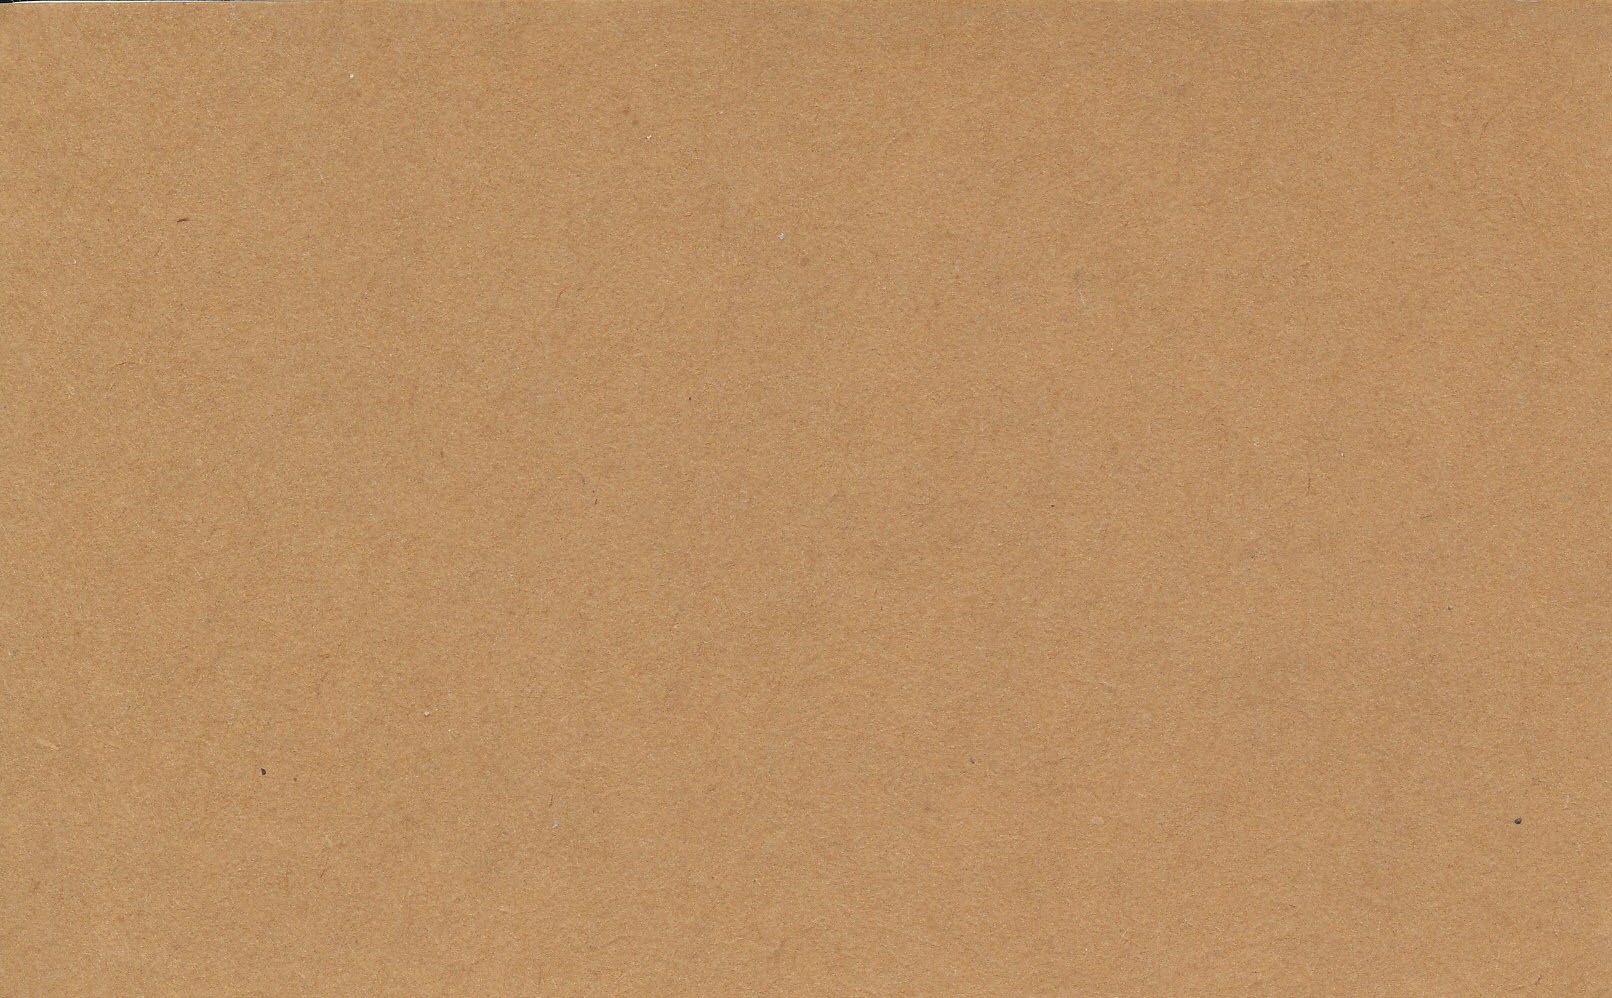 Kraft Paper Scan For Texture